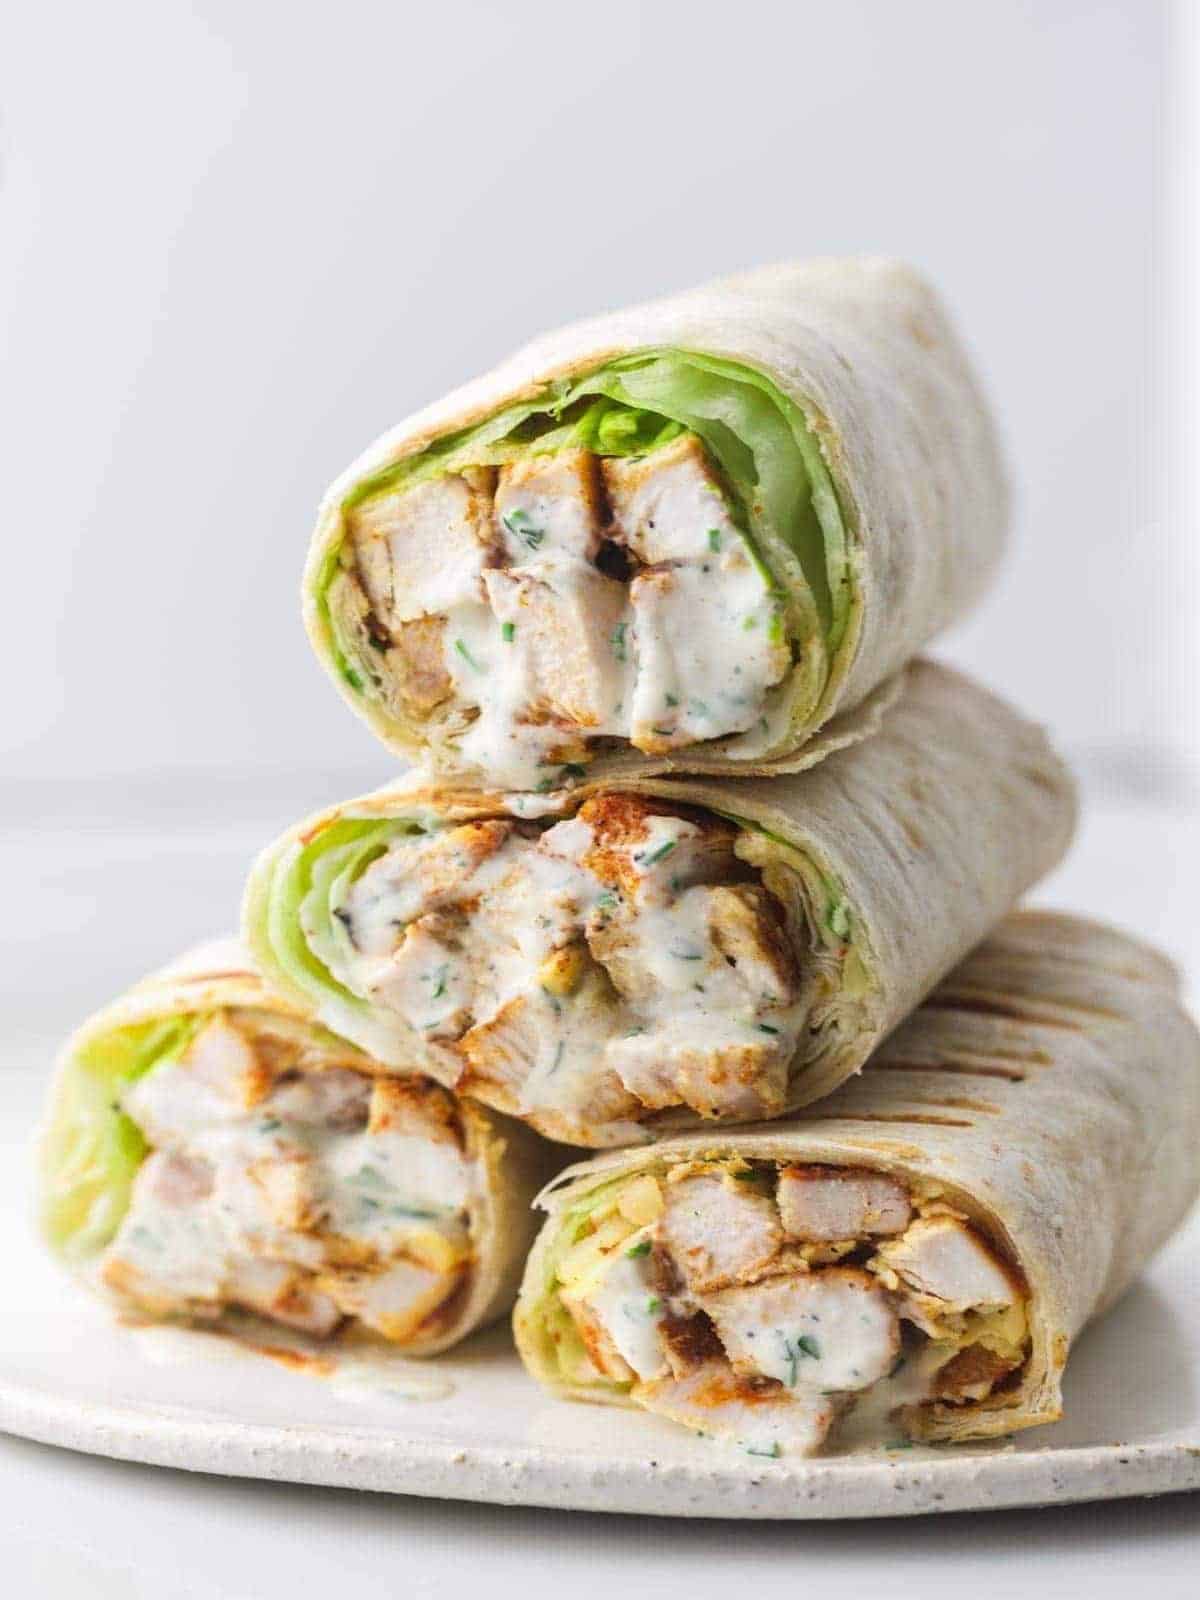 Four healthy grilled chicken wraps stacked on a plate.